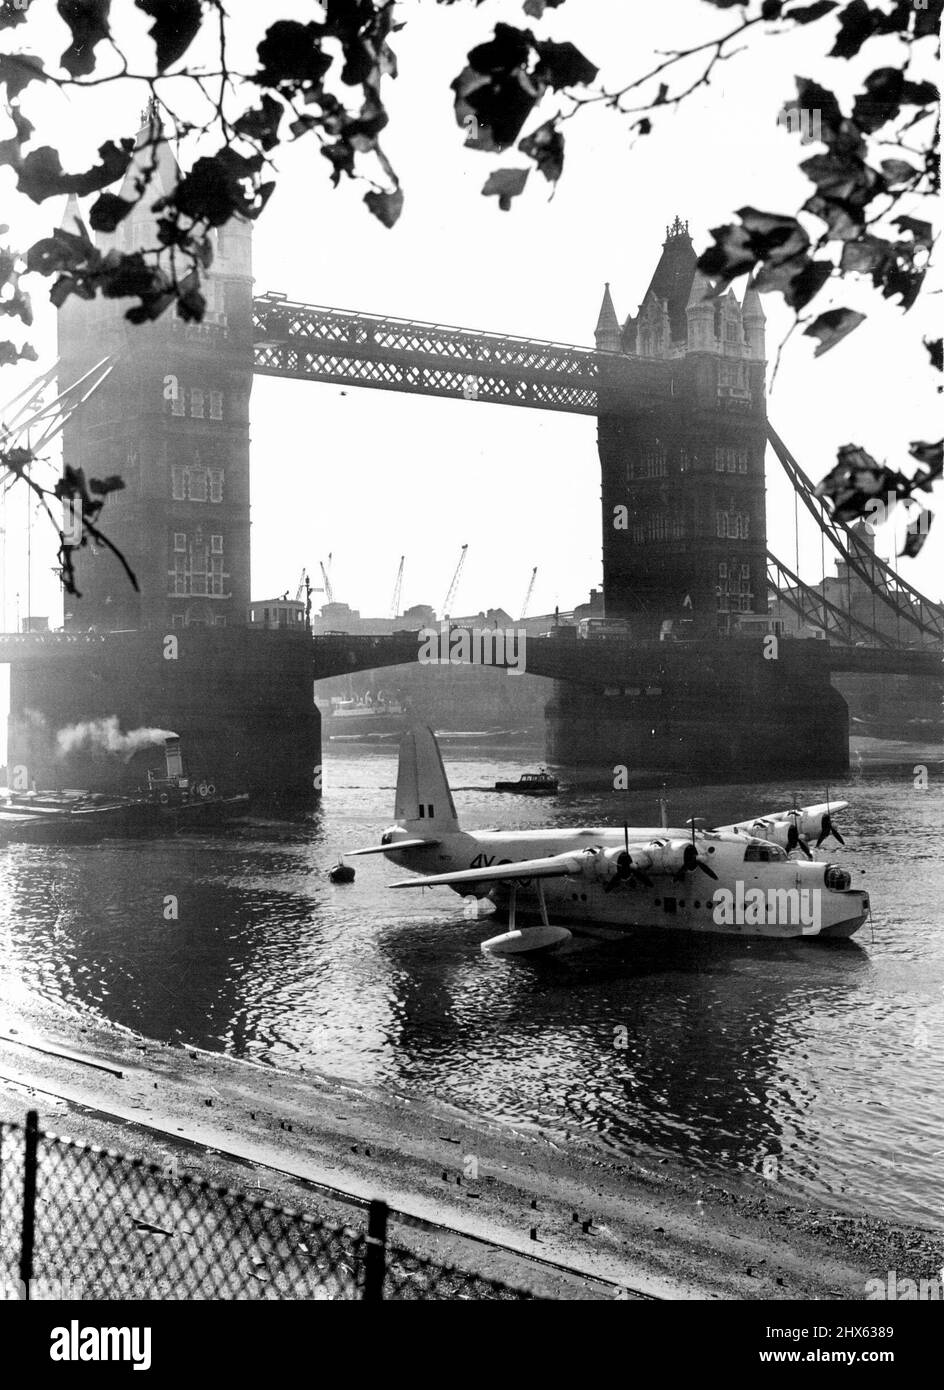 Thames Has Strange Visitor - For Battle of Britain Week. Strange visitor to the River Thames is this Sunderland Flying Boat, seen here against a background of the Tower Bridge, which has been moored here for the Battle of Britain week - the tenth anniversary of the victory of 'The Few' ever the German Luftwaffe. Celebrations and displays by the Royal Air Force are being held all over the country during this week. September 12, 1950. Stock Photo